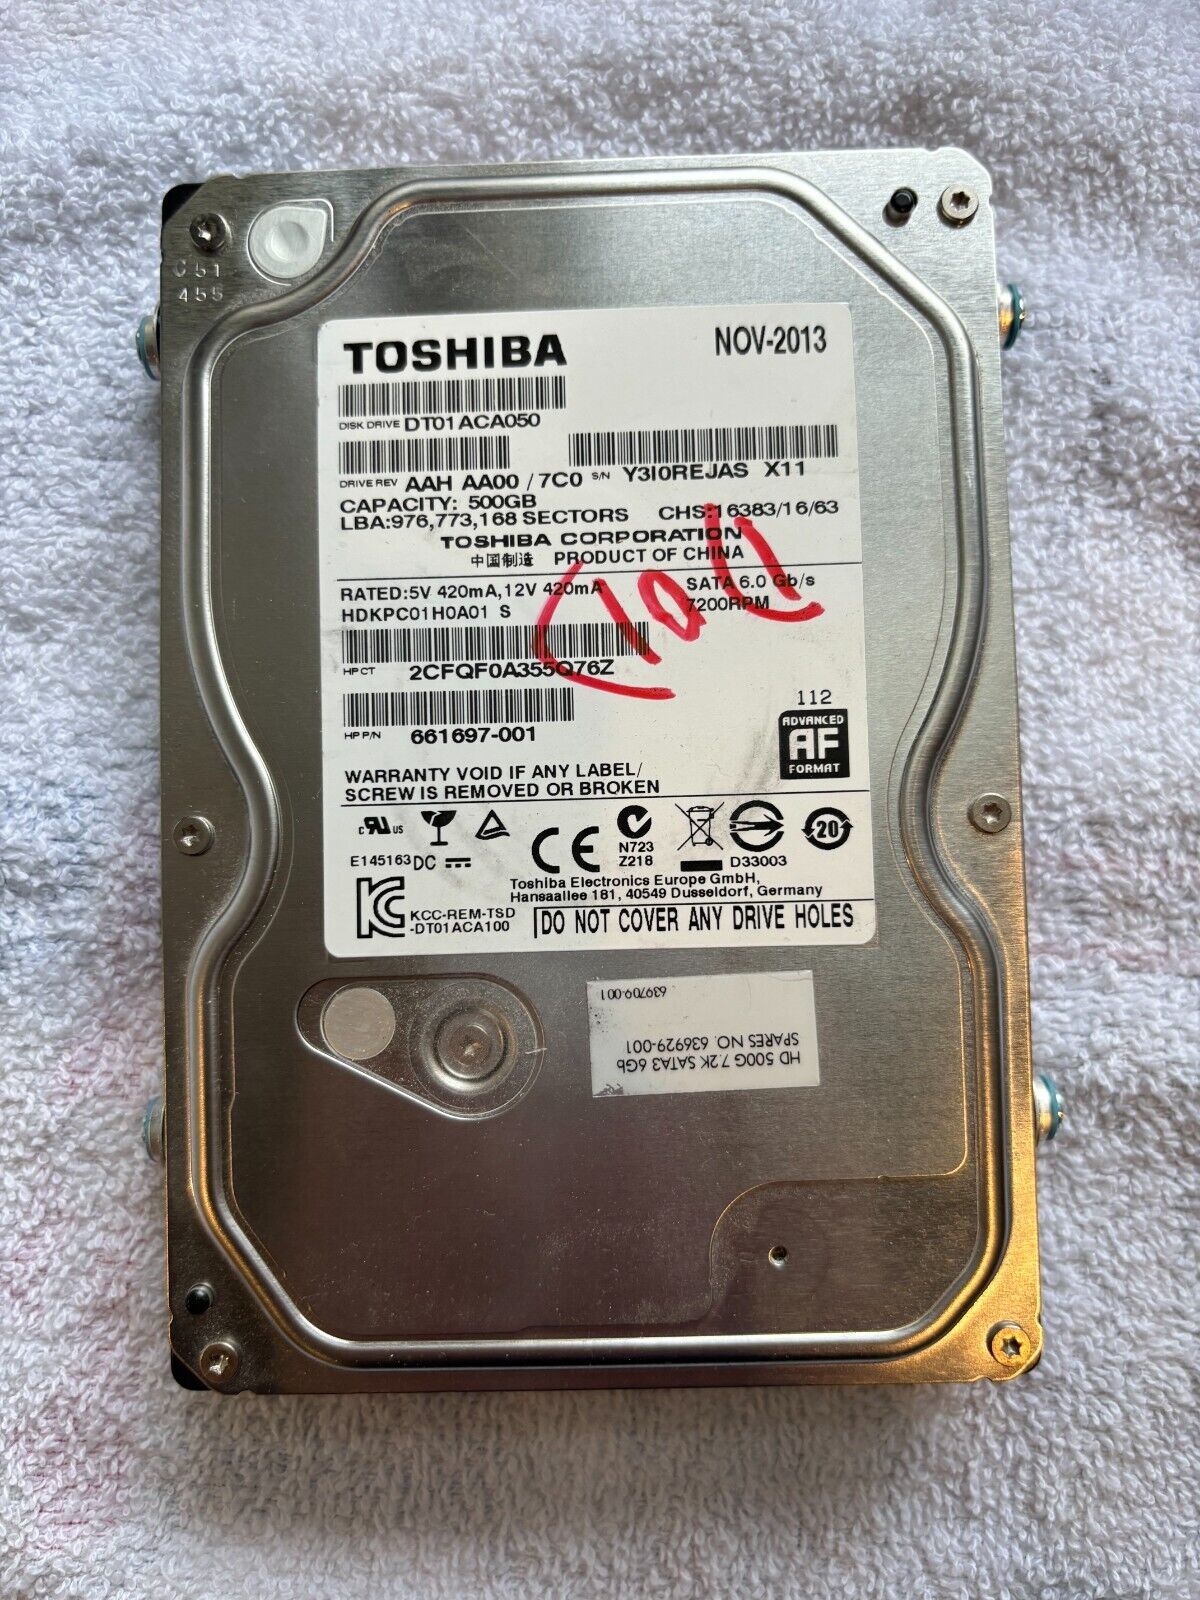 Samsung 40 GB HD040GJ/P  Hard Drive 3.5 SATA Tested and Wiped - GREAT CONDITION